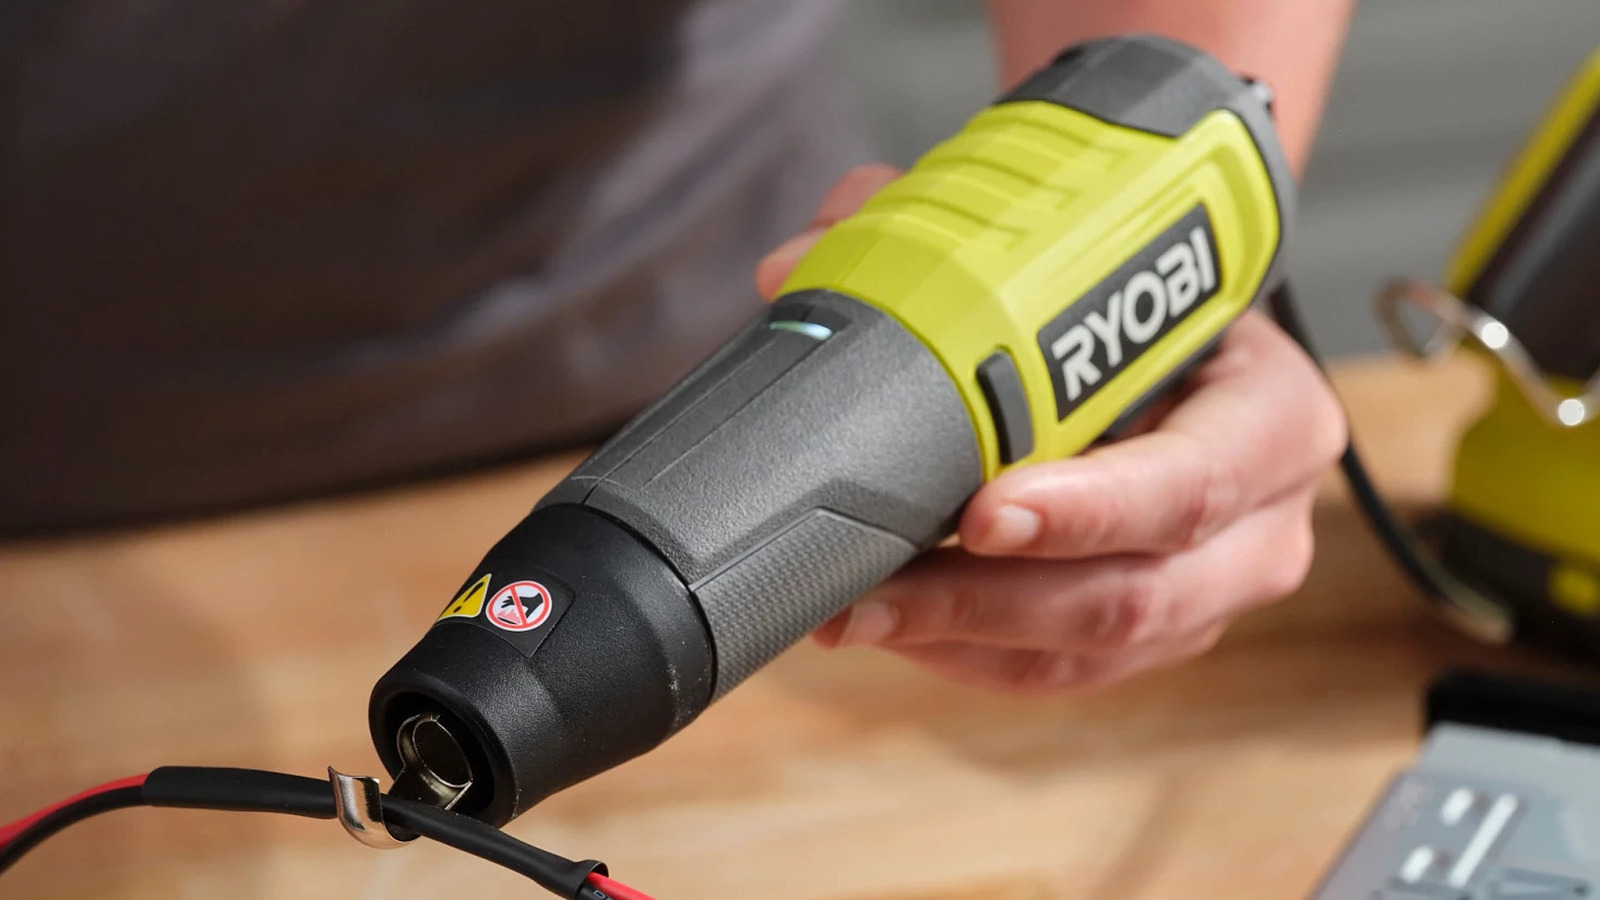 https://www.slashgear.com/img/gallery/this-ryobi-18v-one-heat-pen-is-just-the-tool-for-tough-to-reach-jobs/l-intro-1693239050.jpg